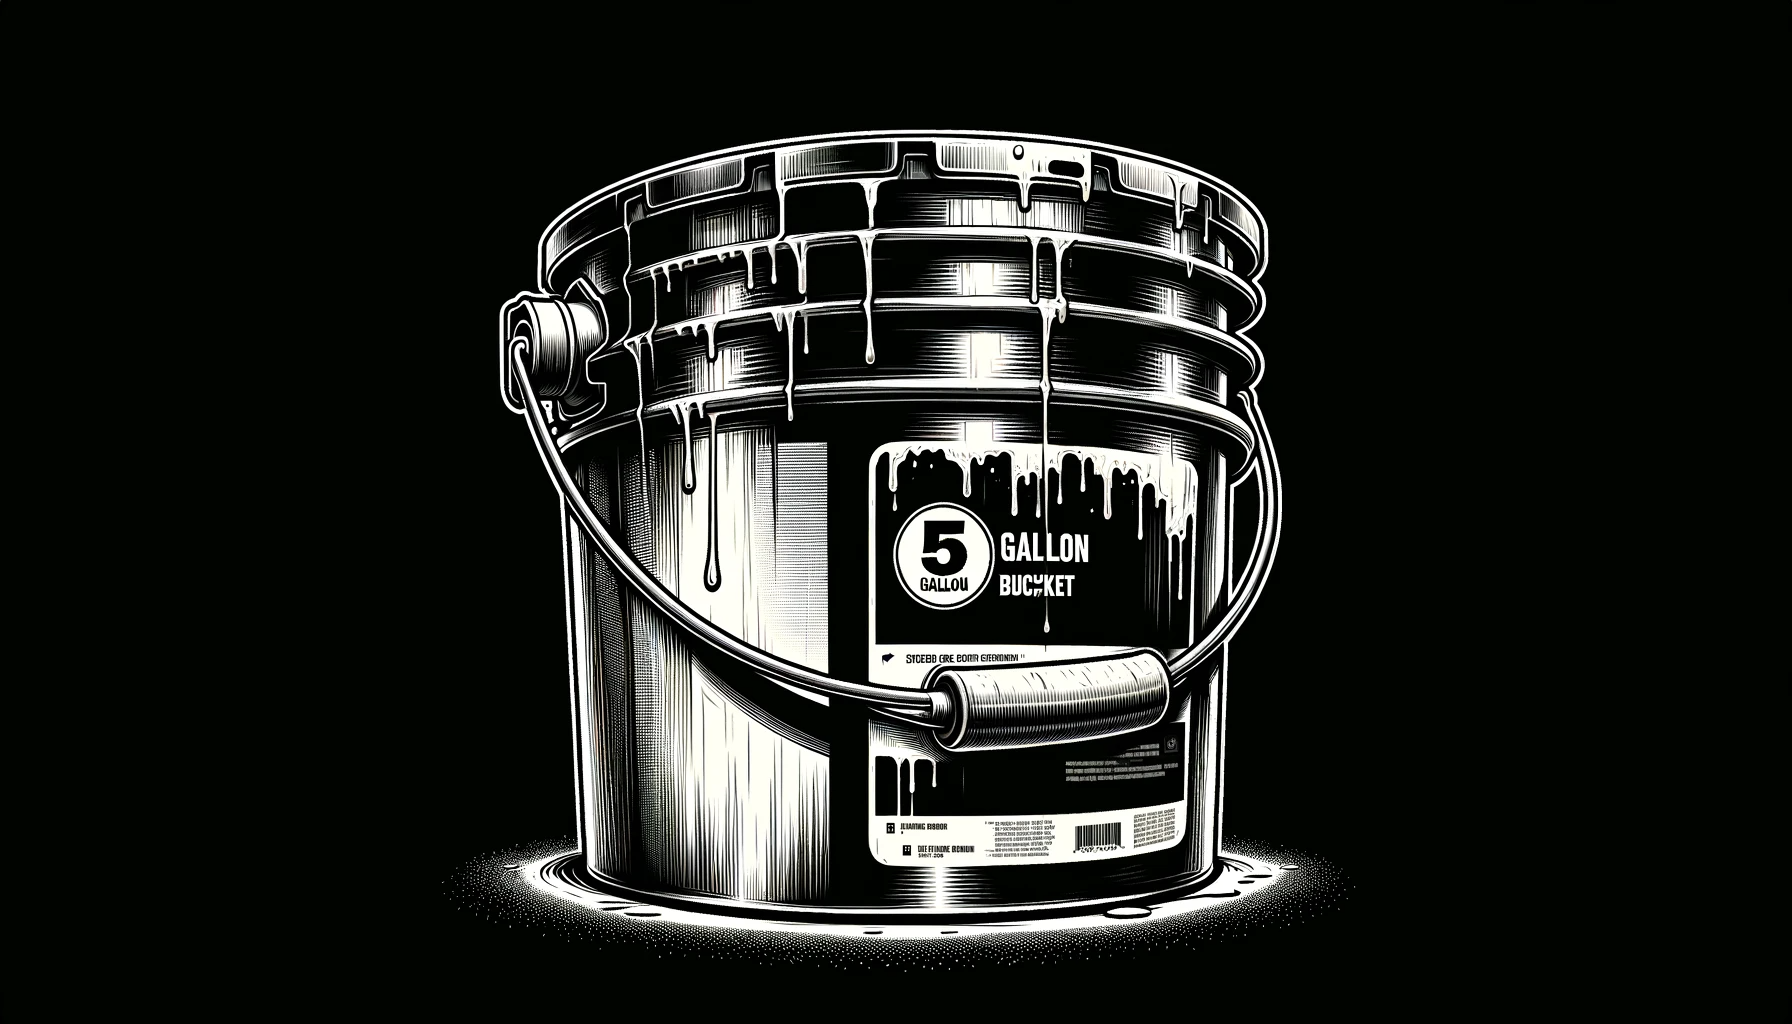 DALL·E 2023 11 19 05.56.35 A wide format illustration of a 5 gallon bucket designed for home paint use against a completely black background. The bucket should be depicted as l